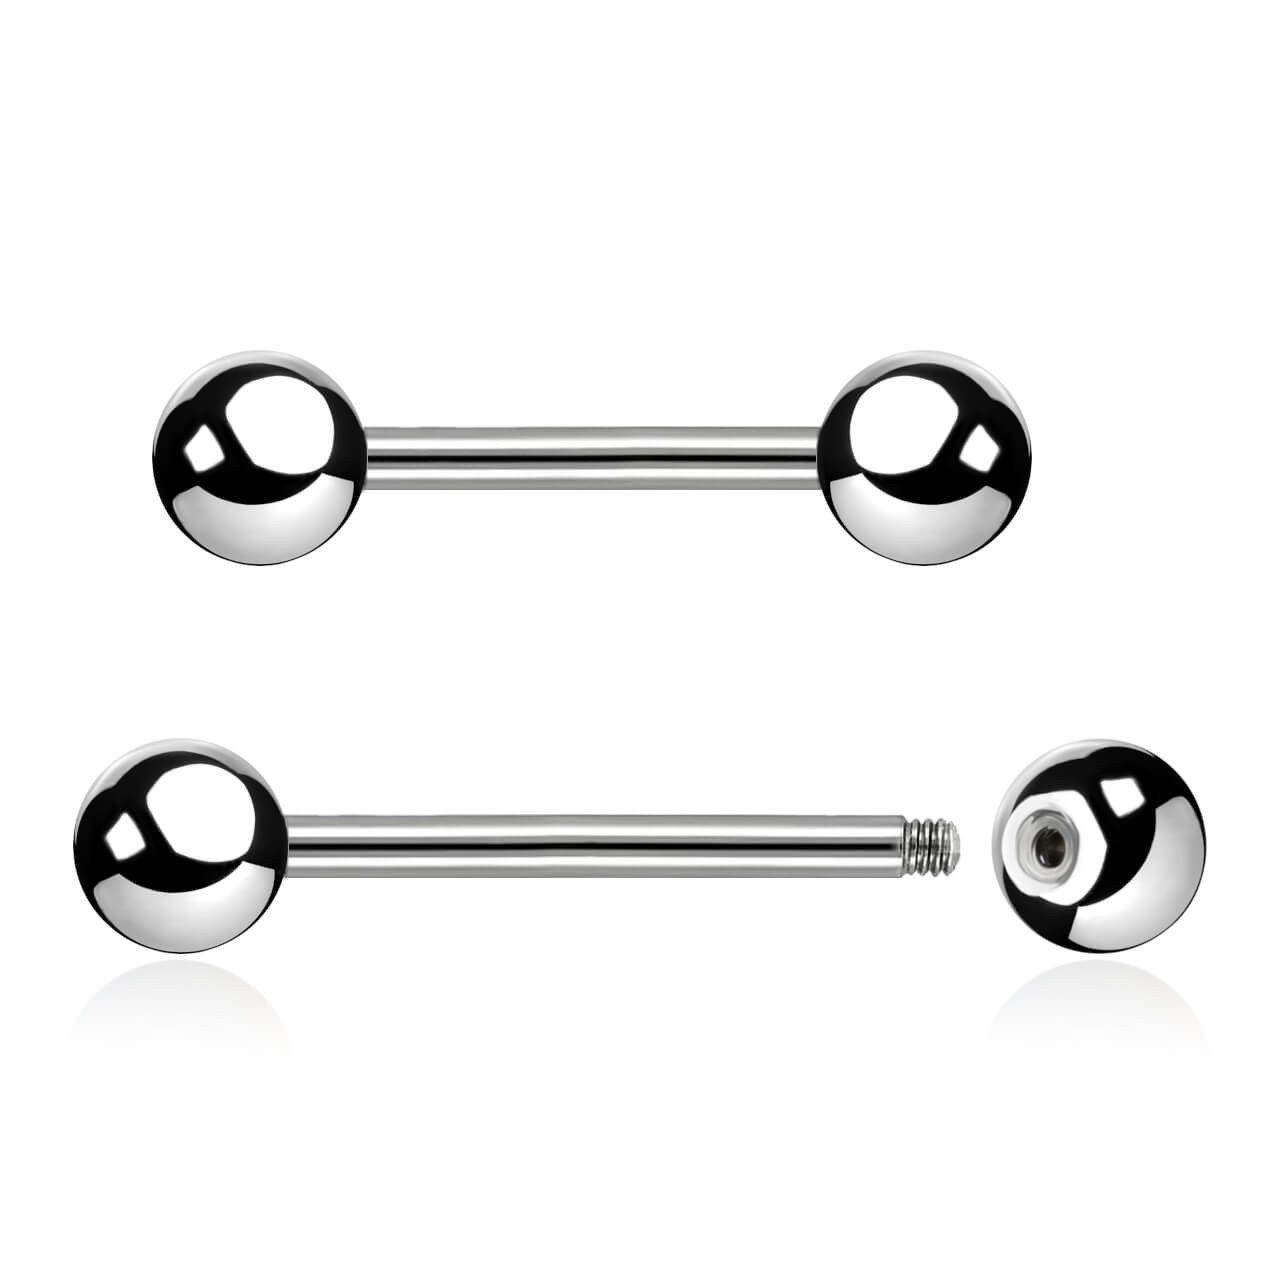 SBA08B3 Wholesale Body Jewelry pack of 25 surgical steel nano barbells, Thickness 0.8mm, ball size 3mm